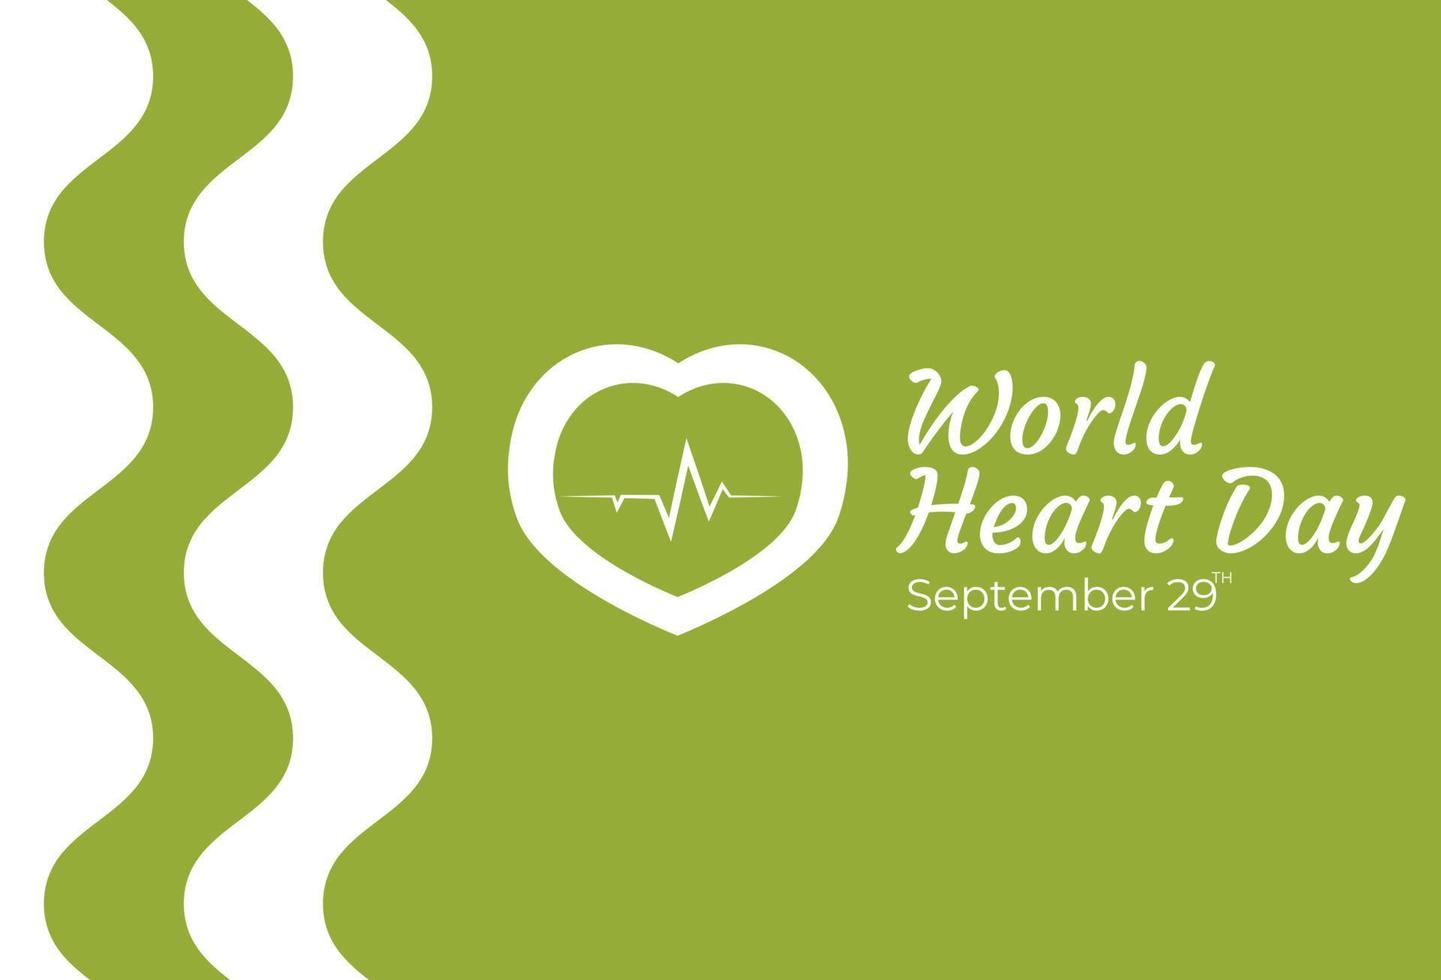 Flat Design Illustration Of World Heart Day Templates, Design Suitable For Posters, Backgrounds, Greeting Cards, World Heart Day Themed vector